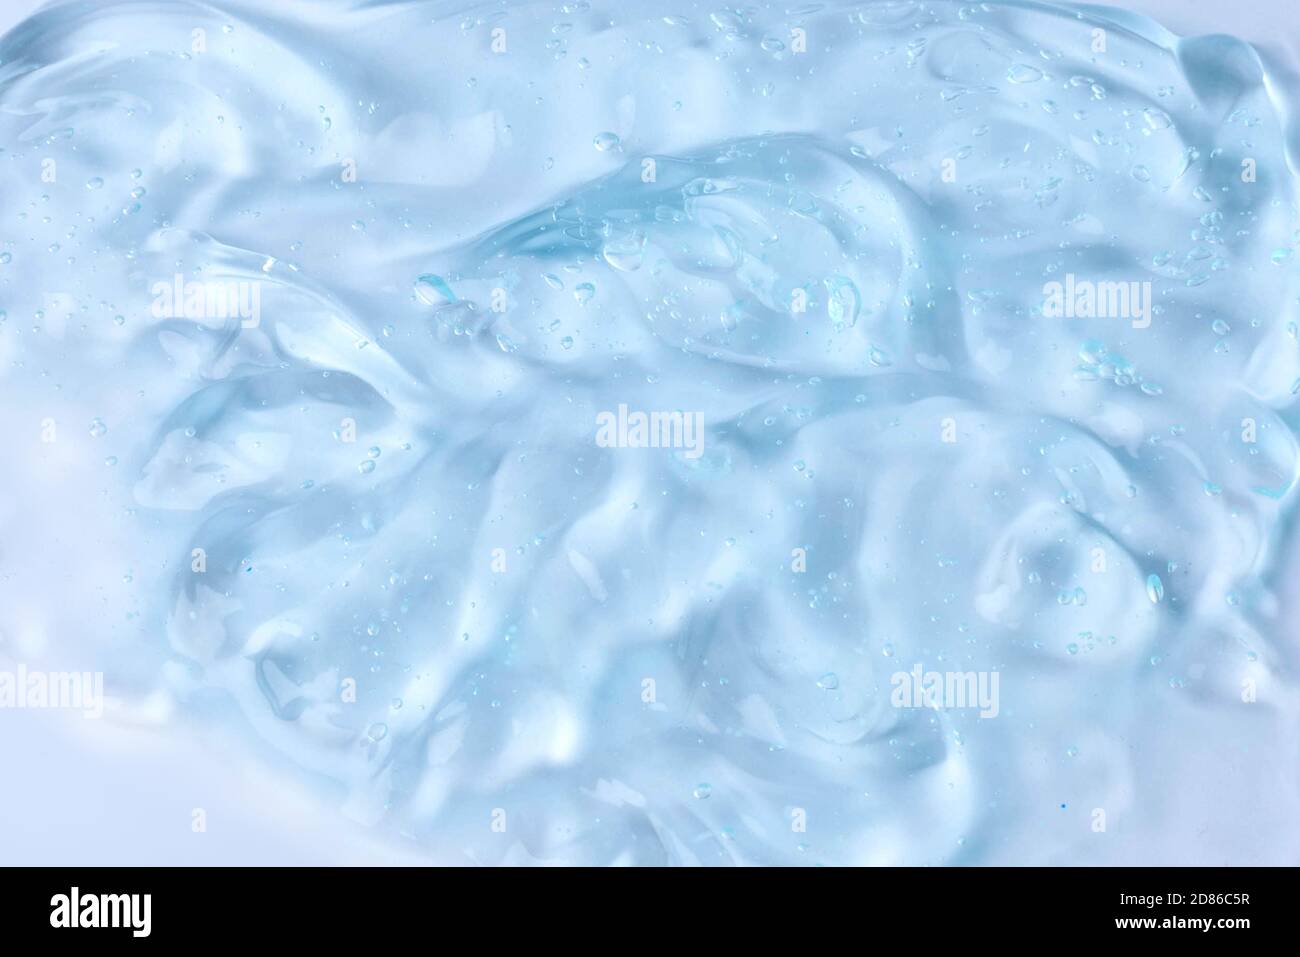 A sample of a cosmetic product. Hyaluronic acid gel. Textured background with oxygen bubbles. Cream gel cosmetic lubricant . Stock Photo